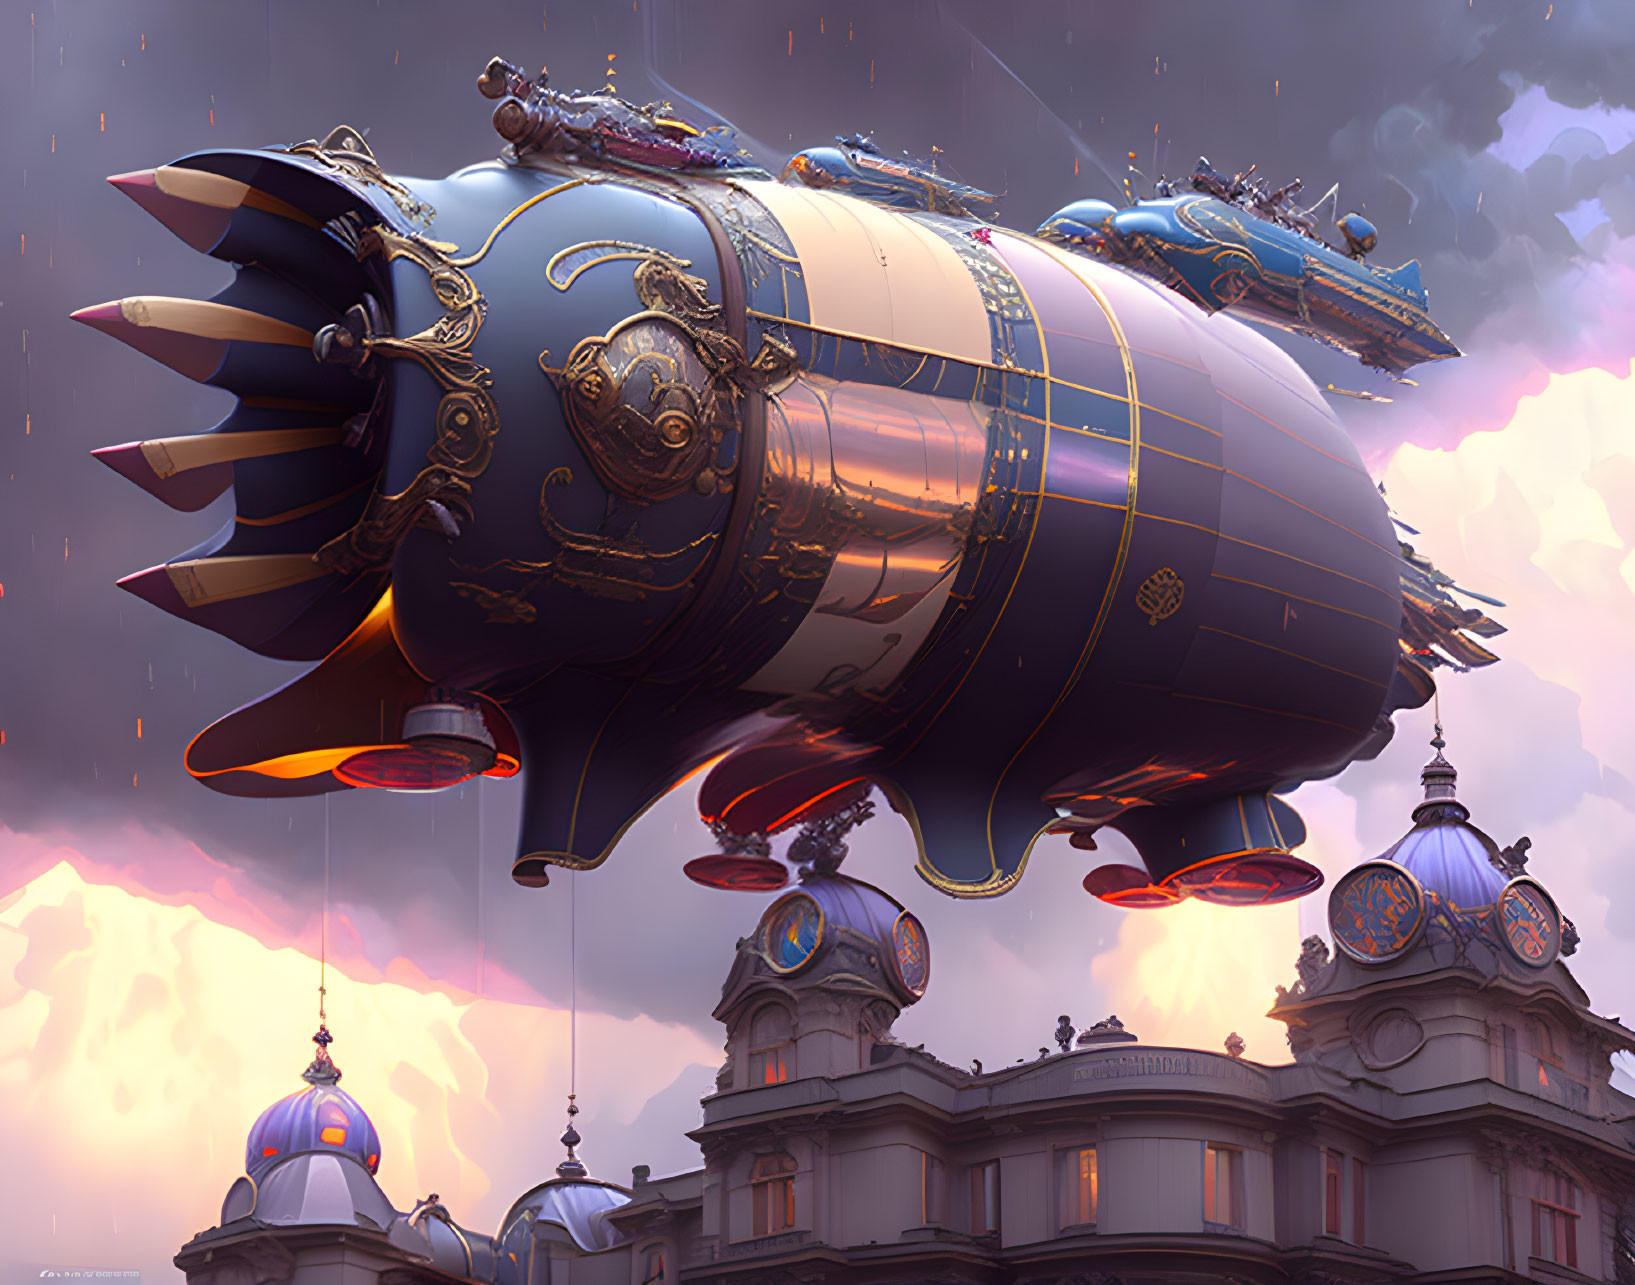 Steampunk airship with gold detailing over classical buildings at dusk